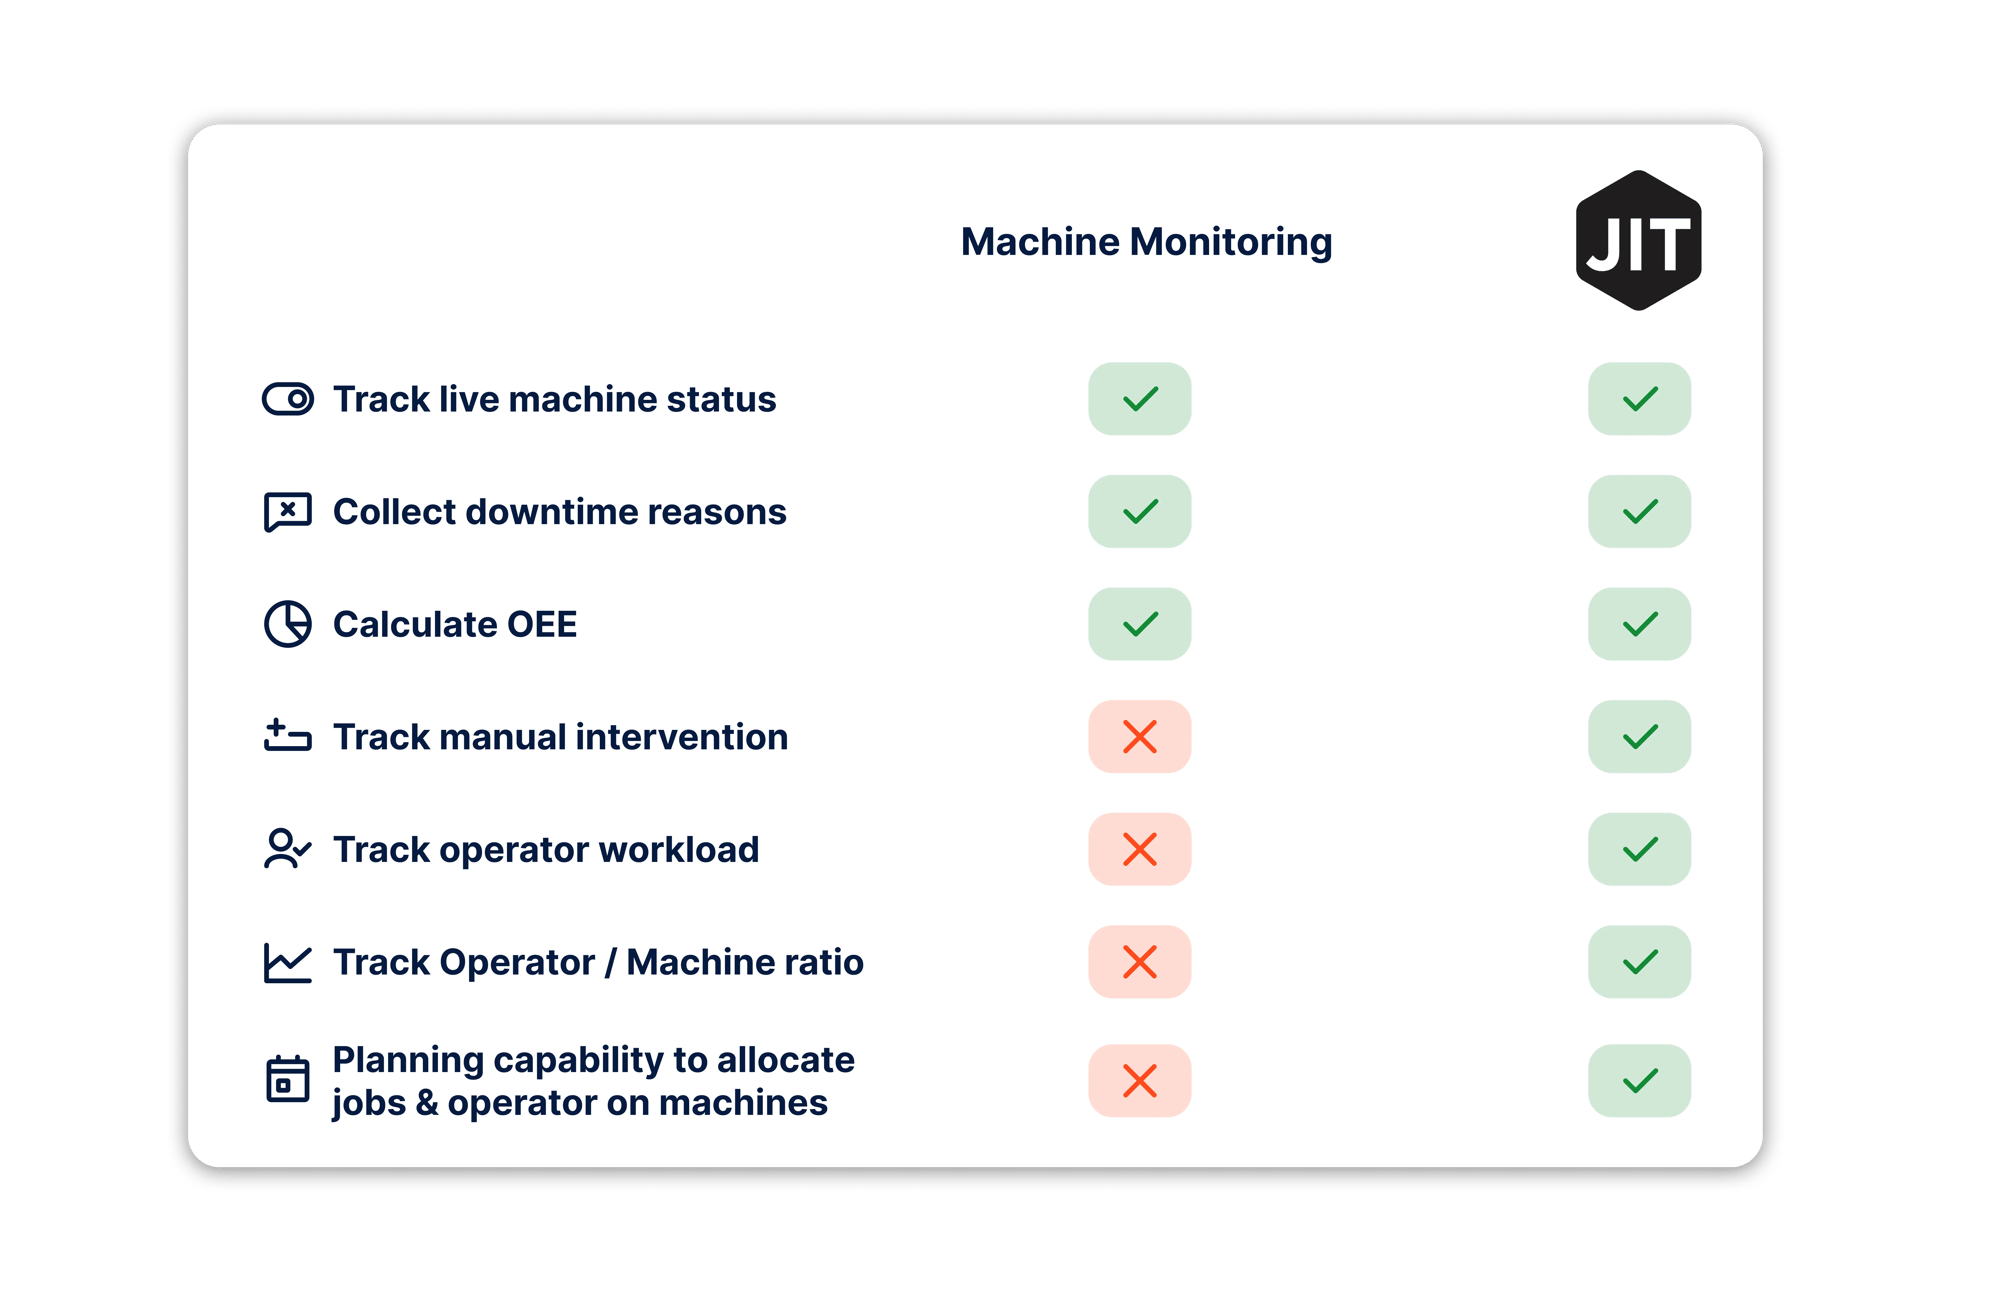 Comparative table between Machine Monitoring Systems versus JITbase. JITbase has additional planning and workforce management features